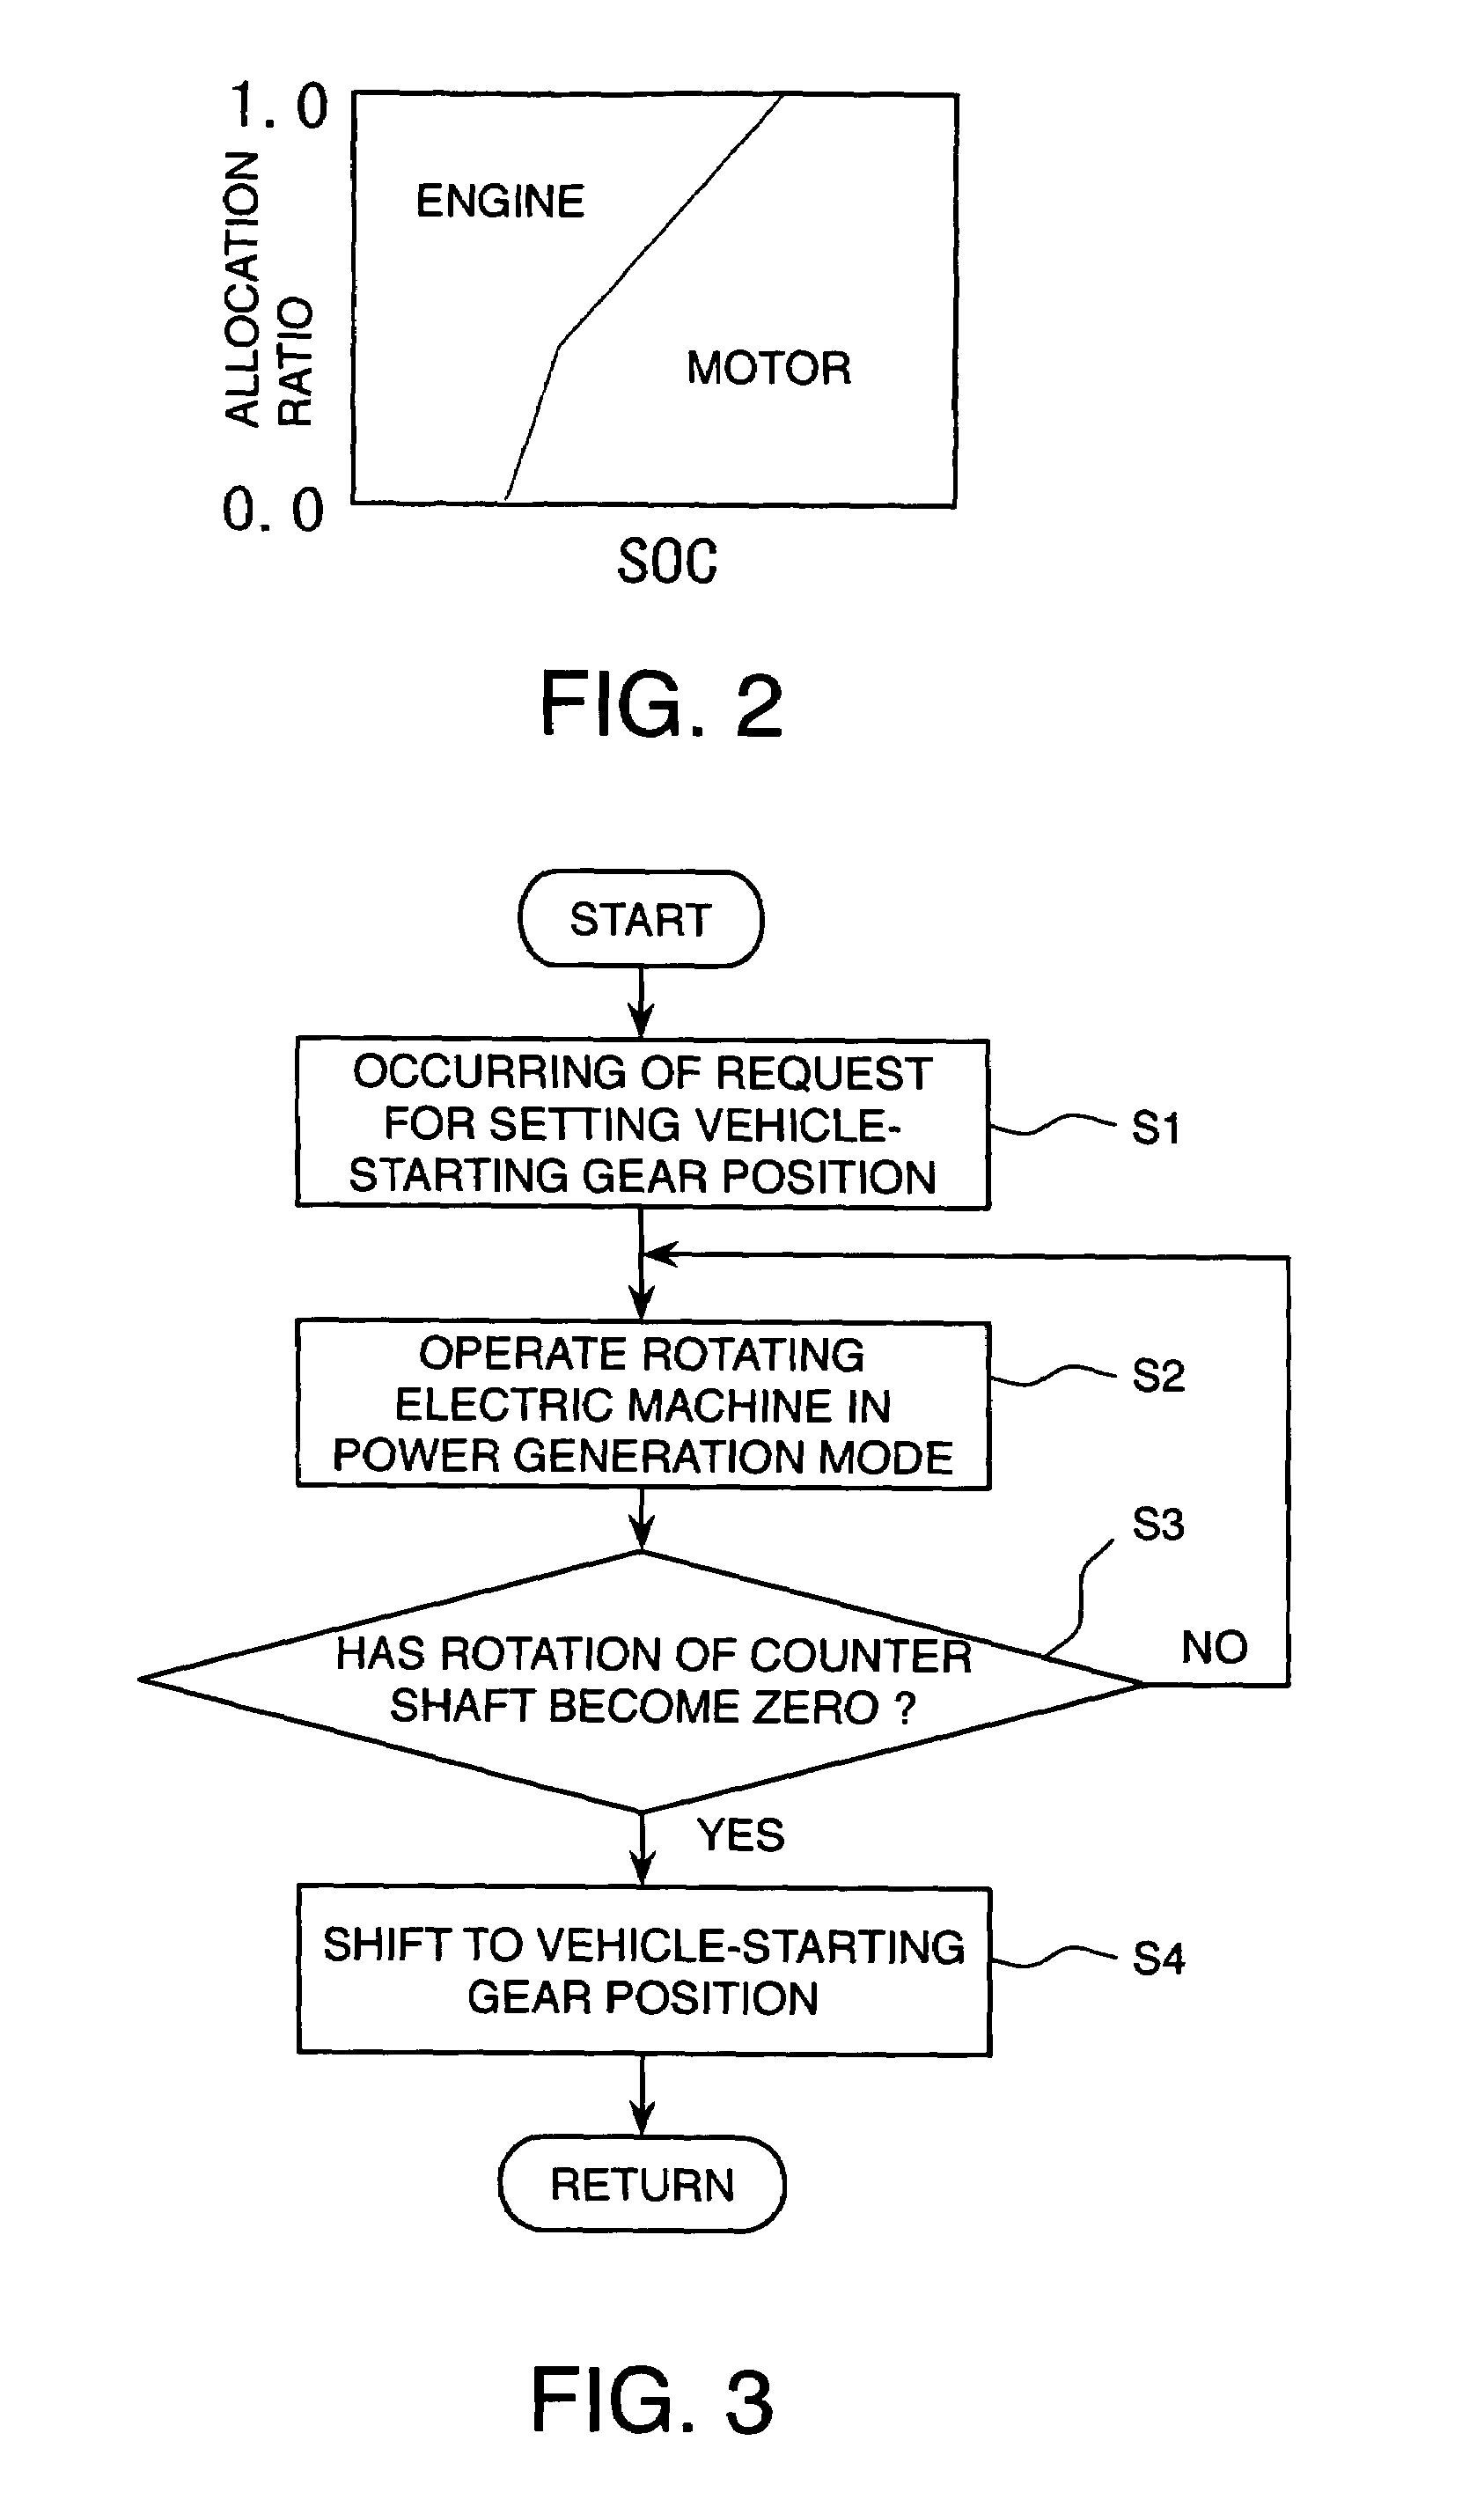 Gear shift control system of hybrid vehicle